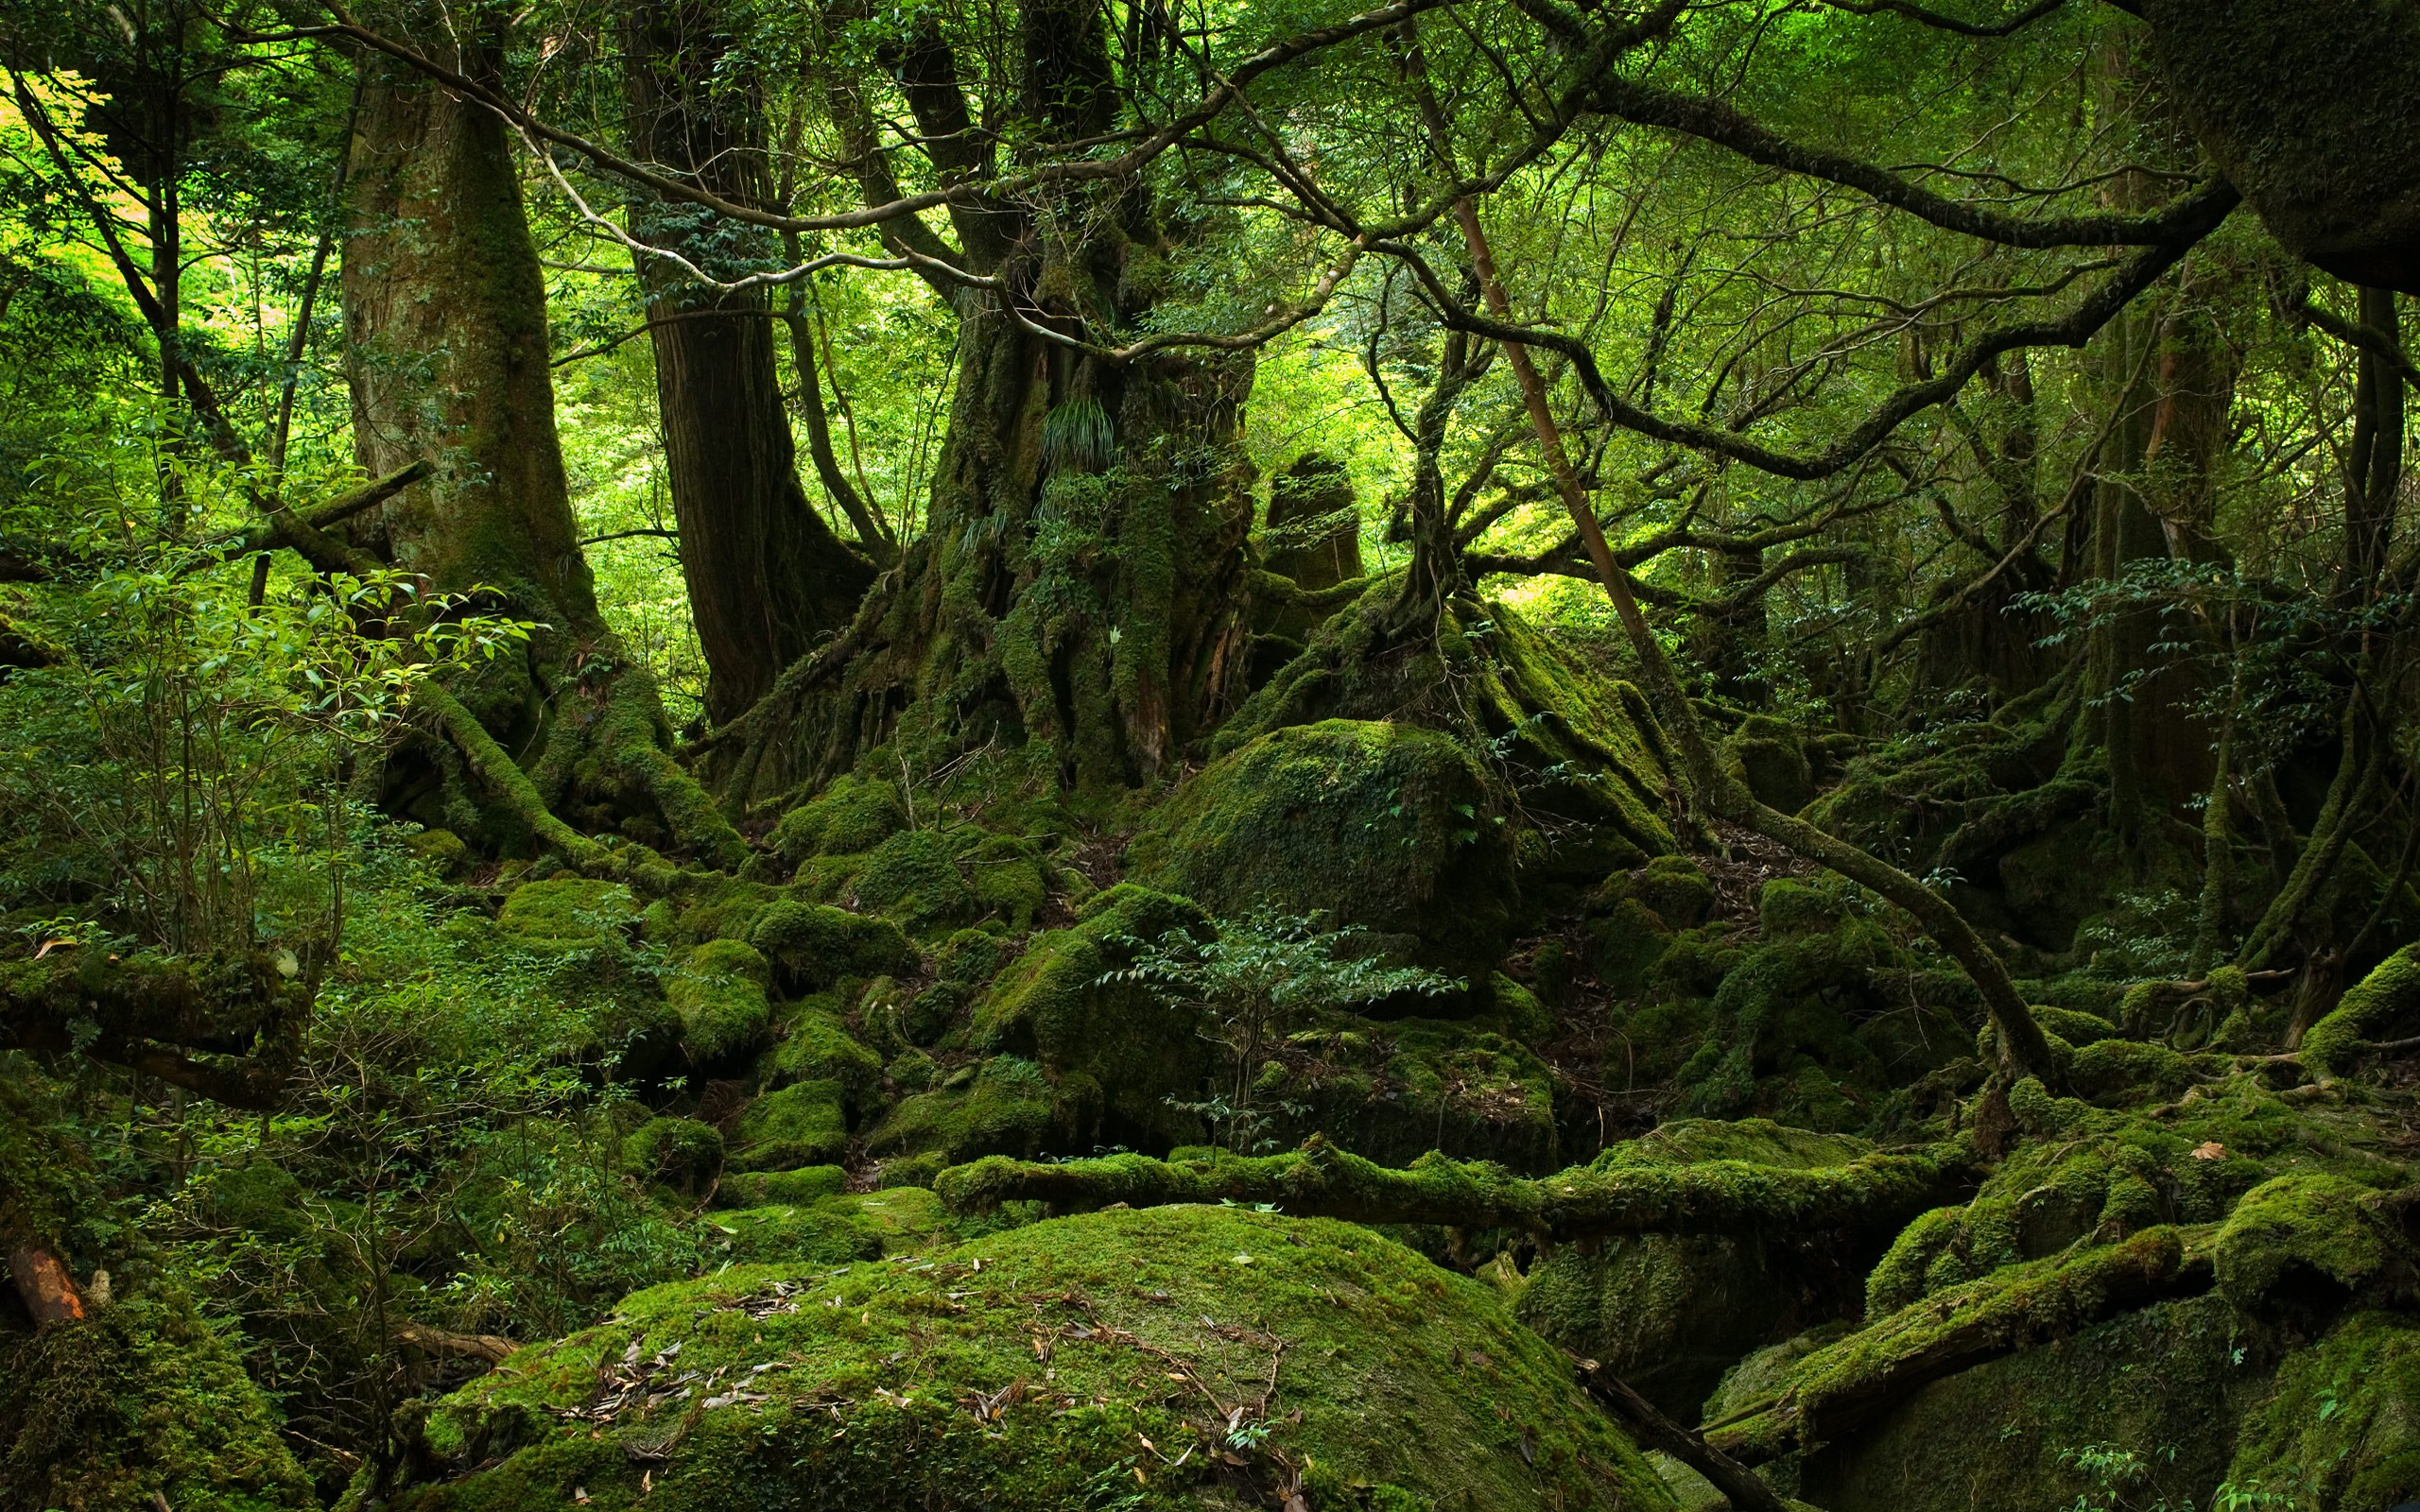 General 2560x1600 forest nature trees plants outdoors